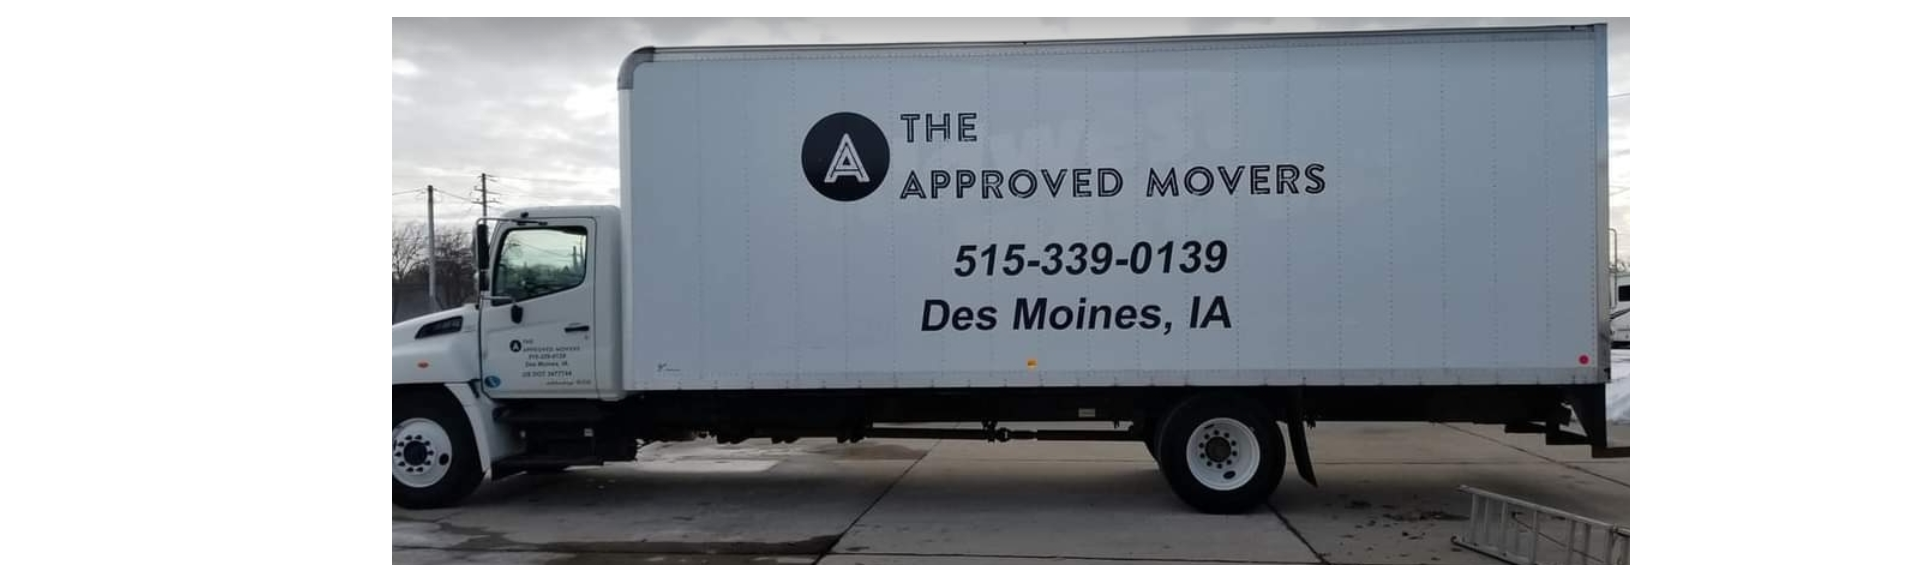 The Approved Movers